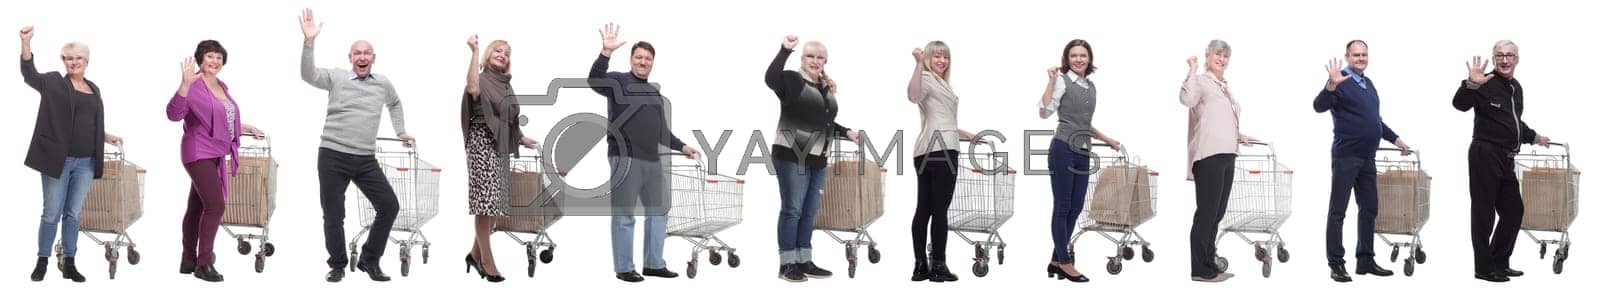 Royalty free image of group of people with trolley greet isolated on white by asdf